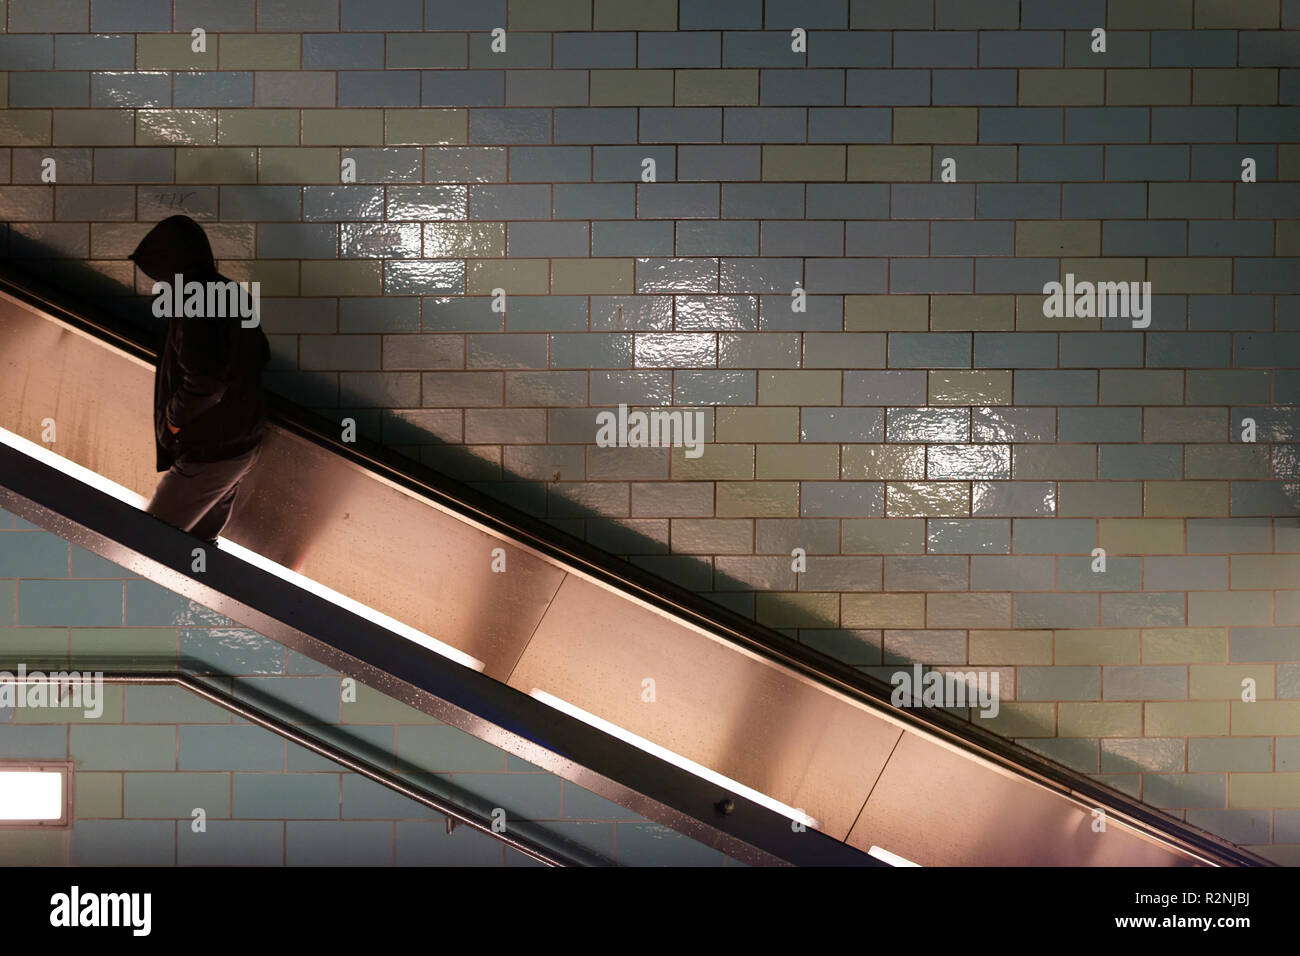 Young man in a hooded jacket goes up a tiled escalator, Stock Photo